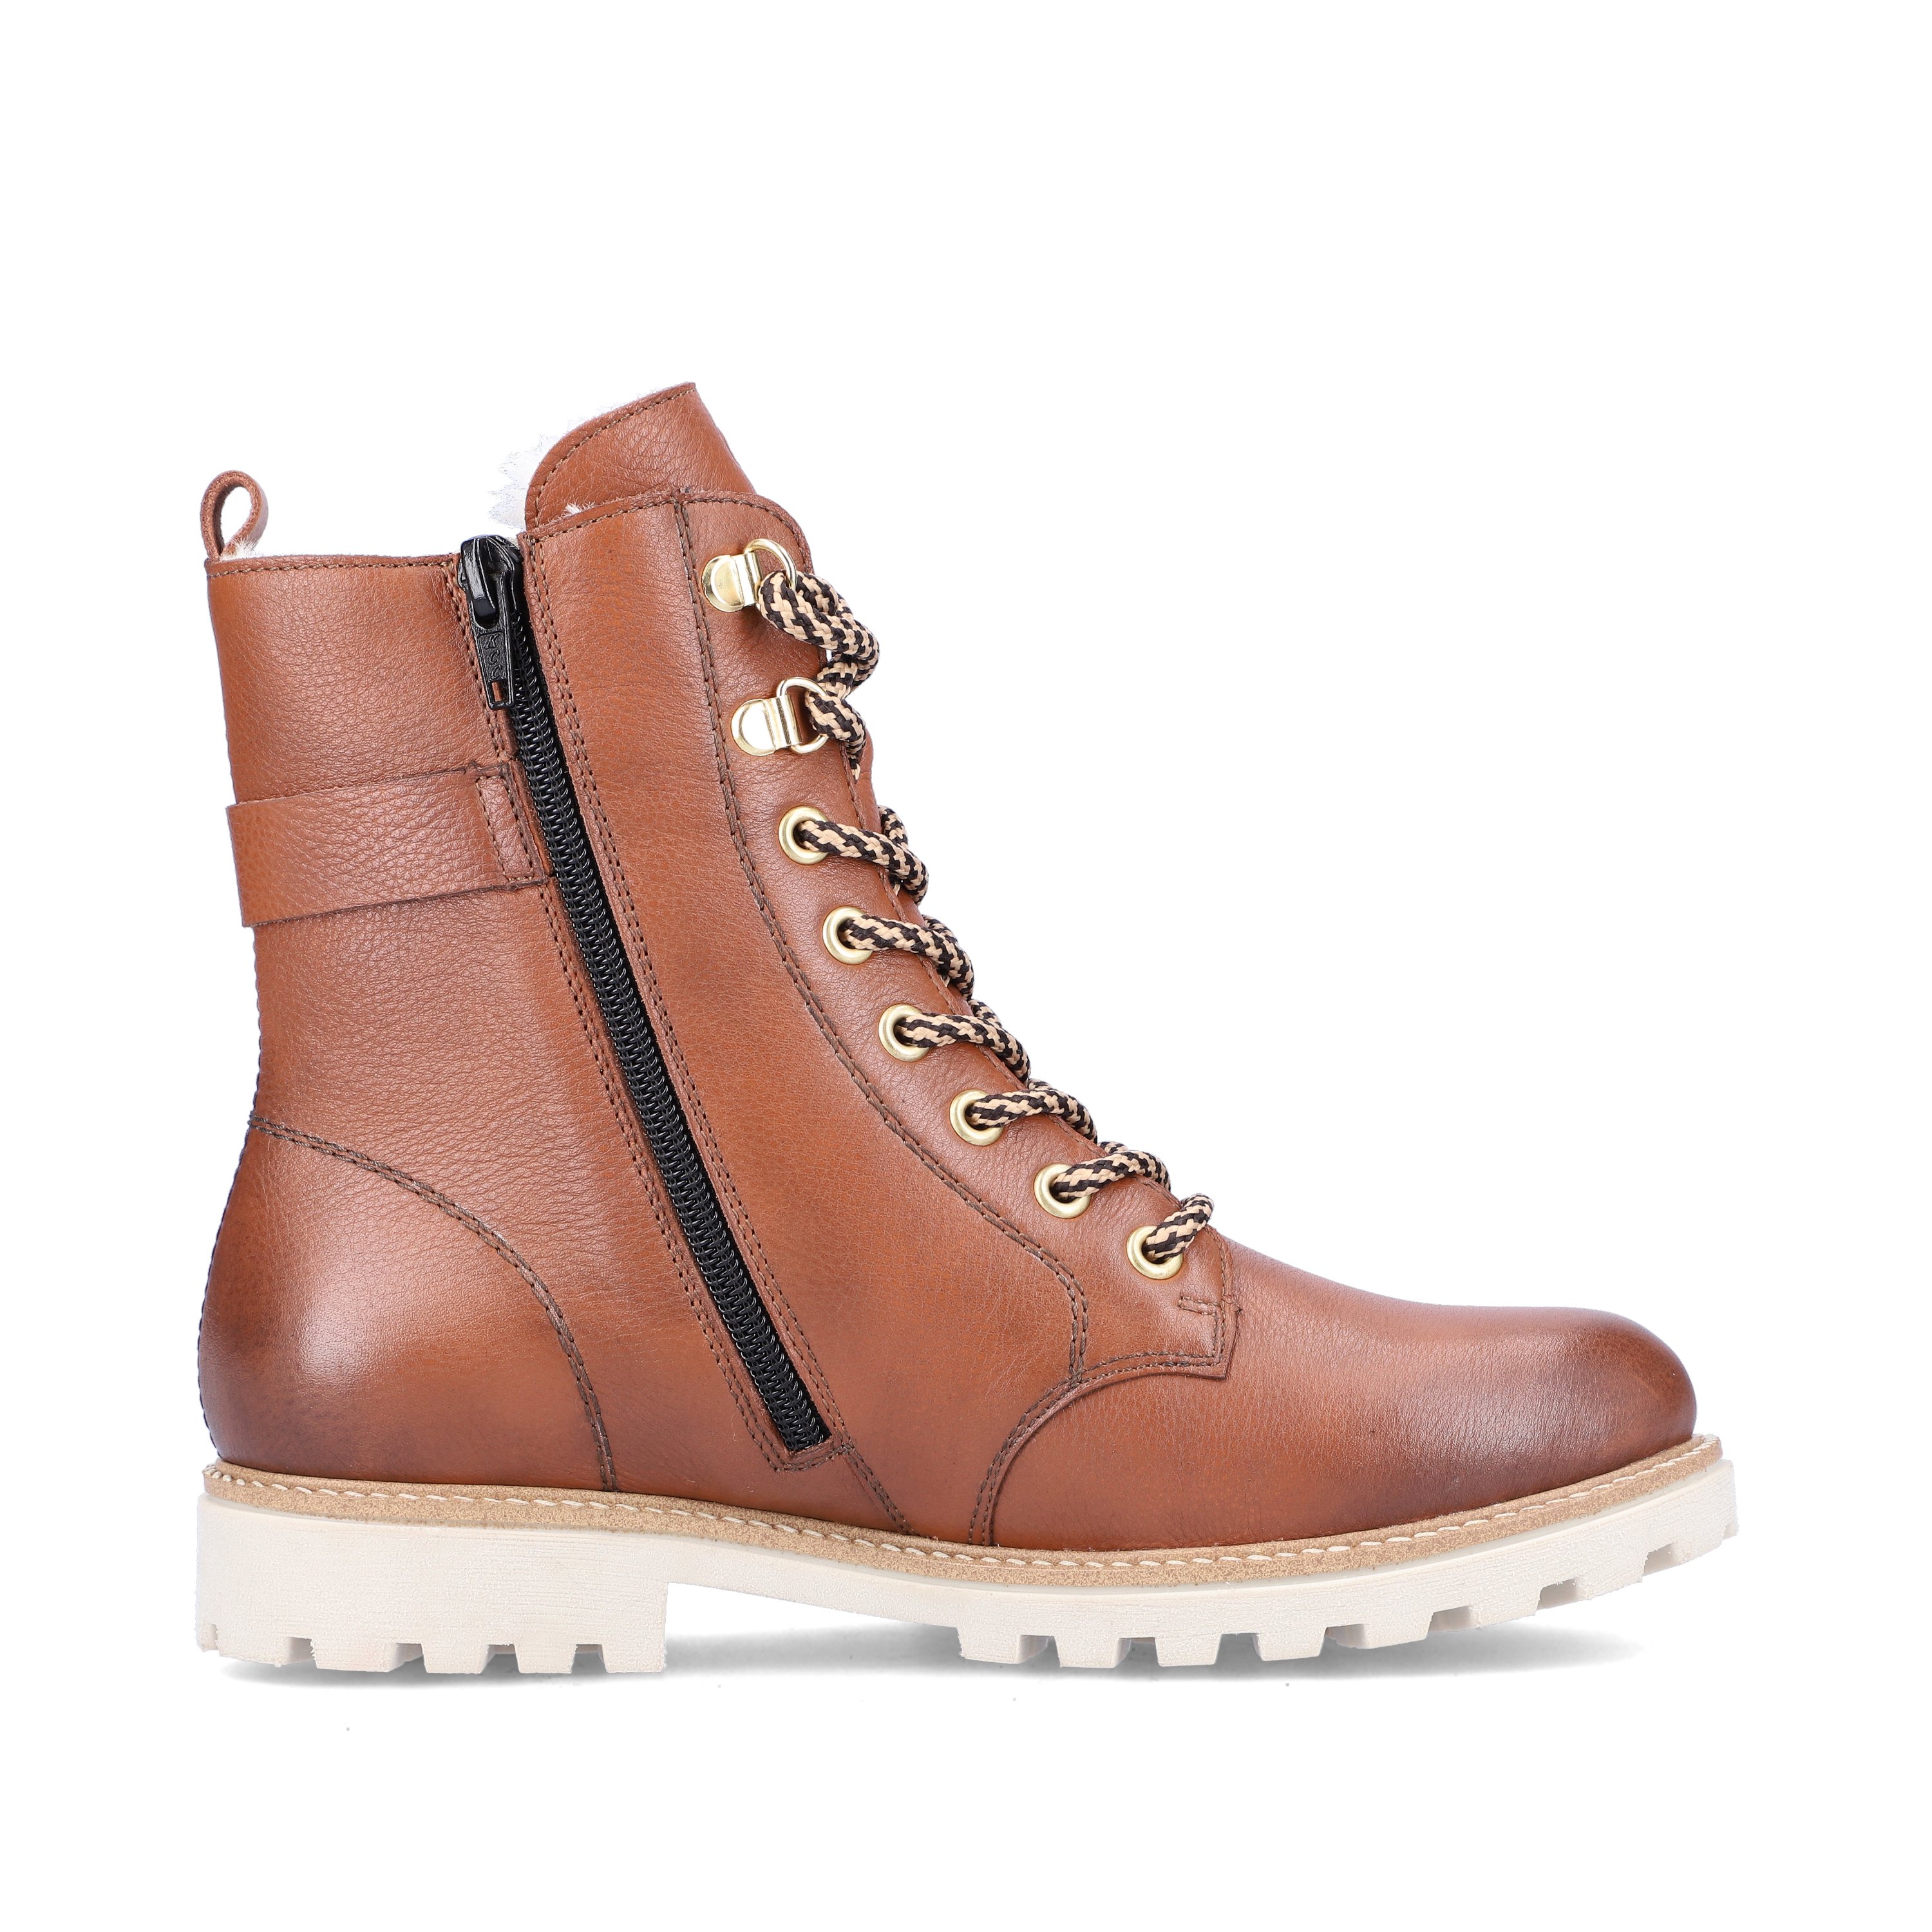 Mocha brown remonte women´s lace-up boots D8475-24 with cushioning profile sole. Shoe inside